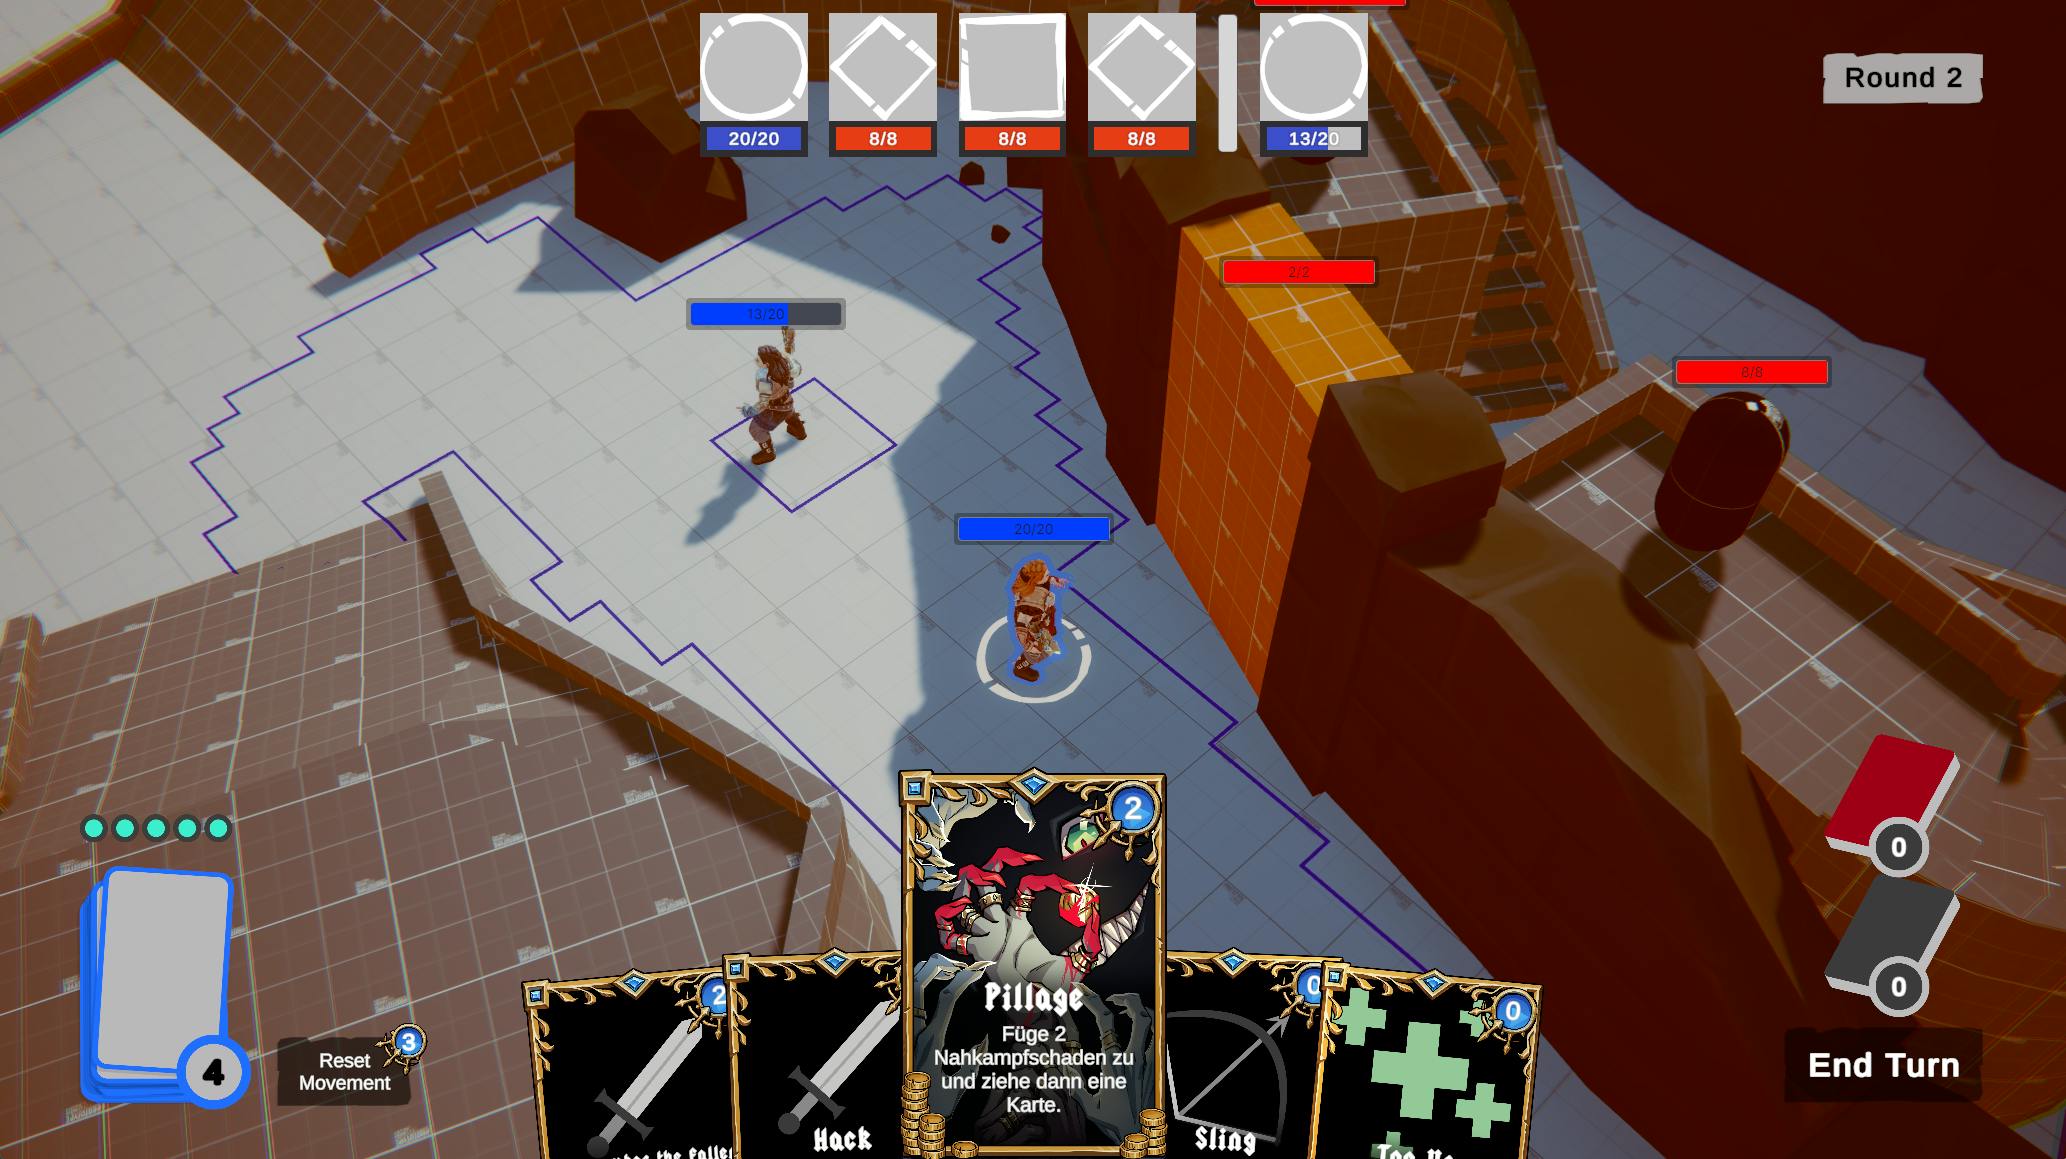 Ingame screenshot of a top-down tactics game featuring characters and game UI.